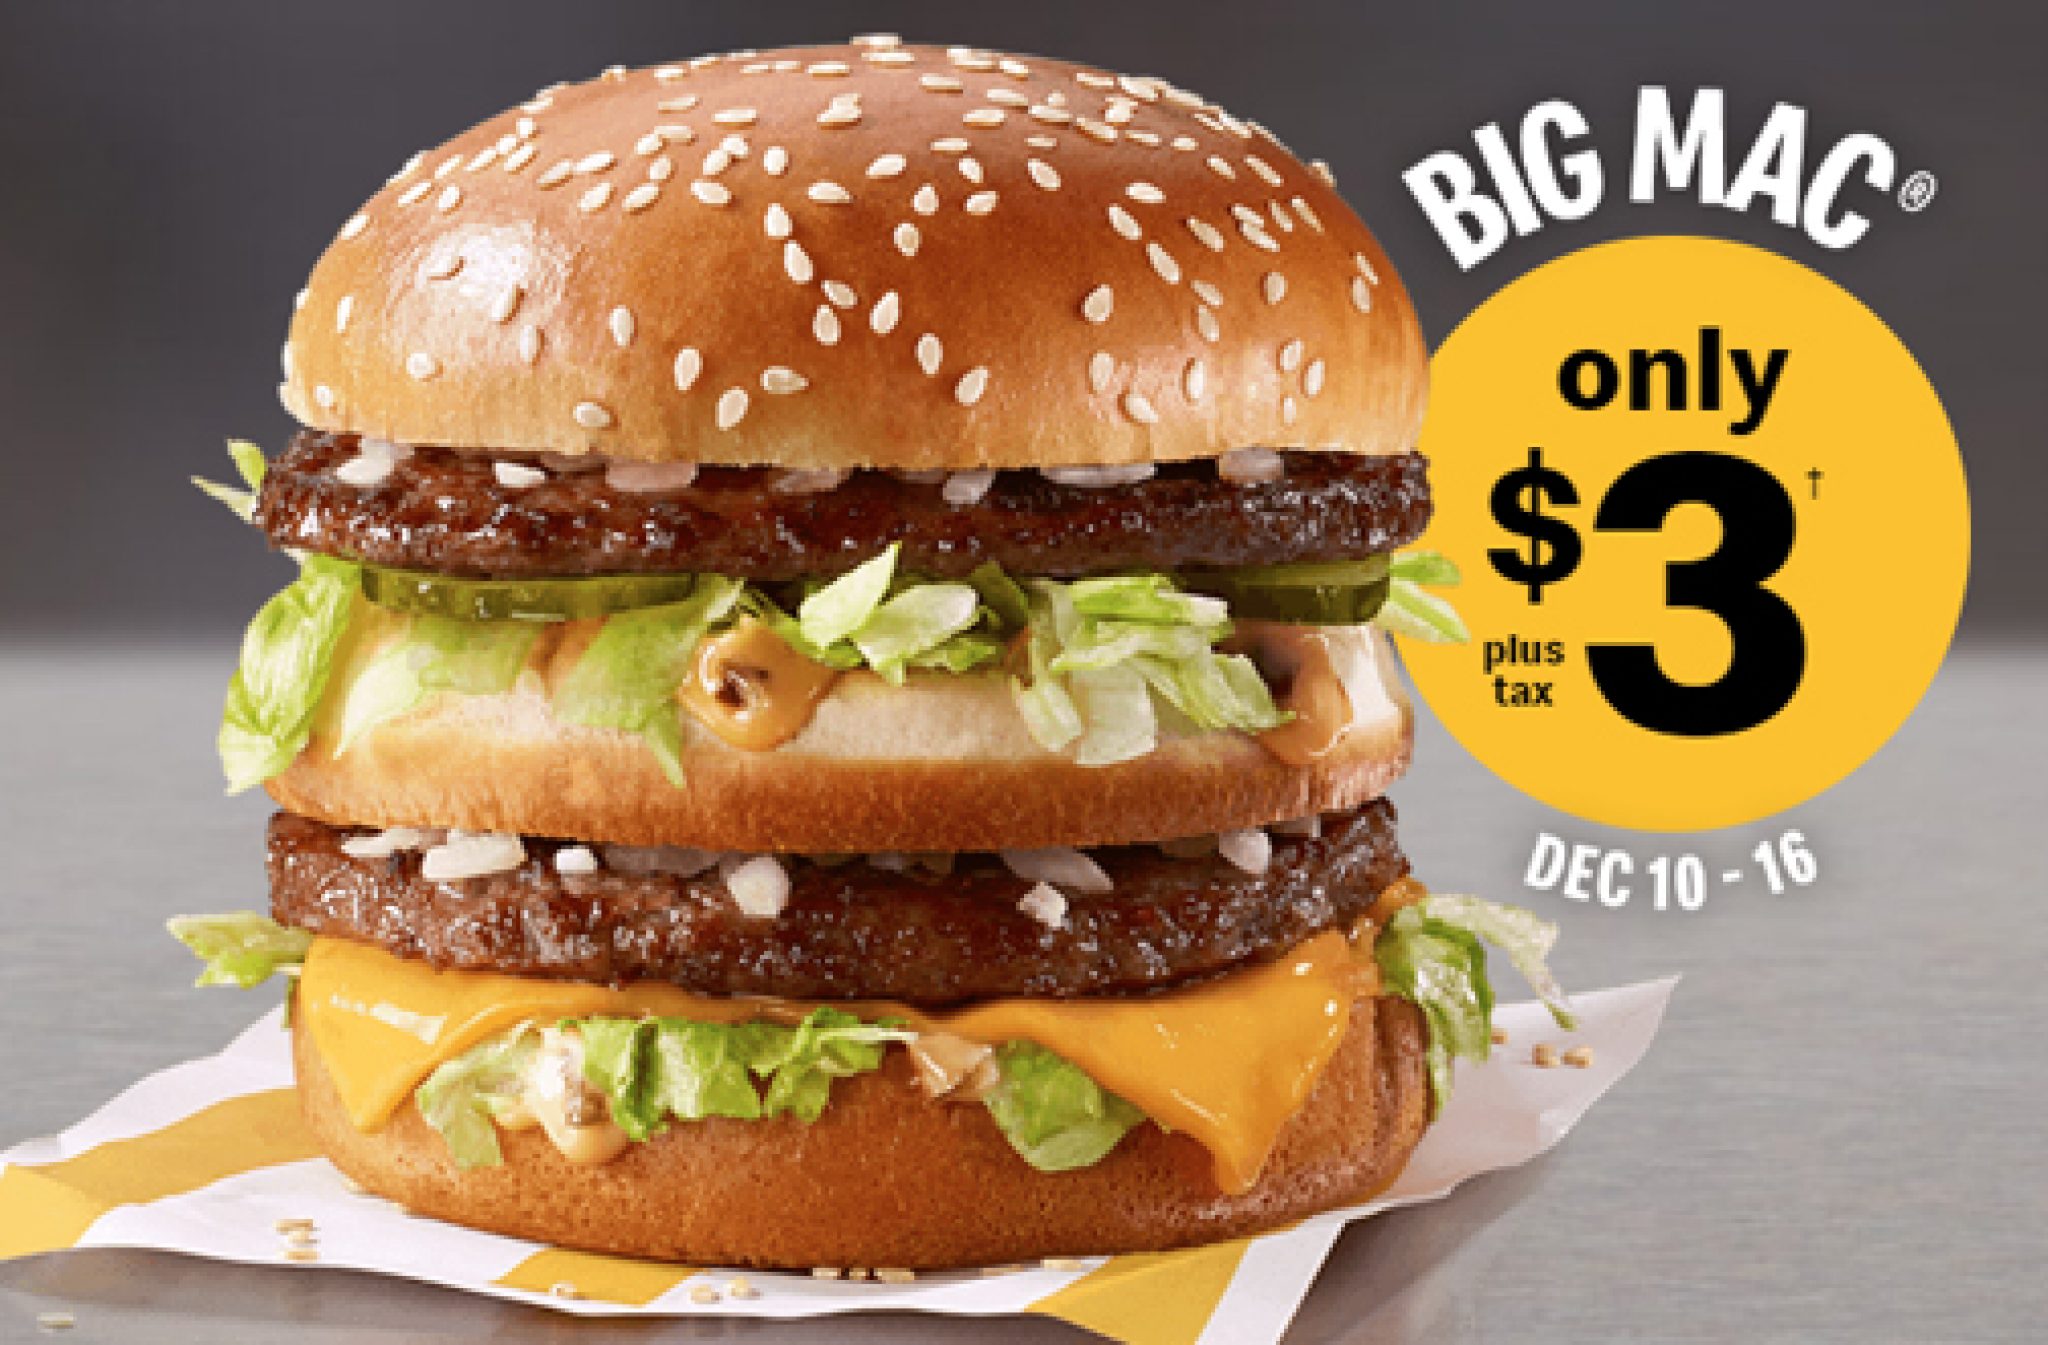 Get a McDonald's Big Mac for Only 3 — Deals from SaveaLoonie!